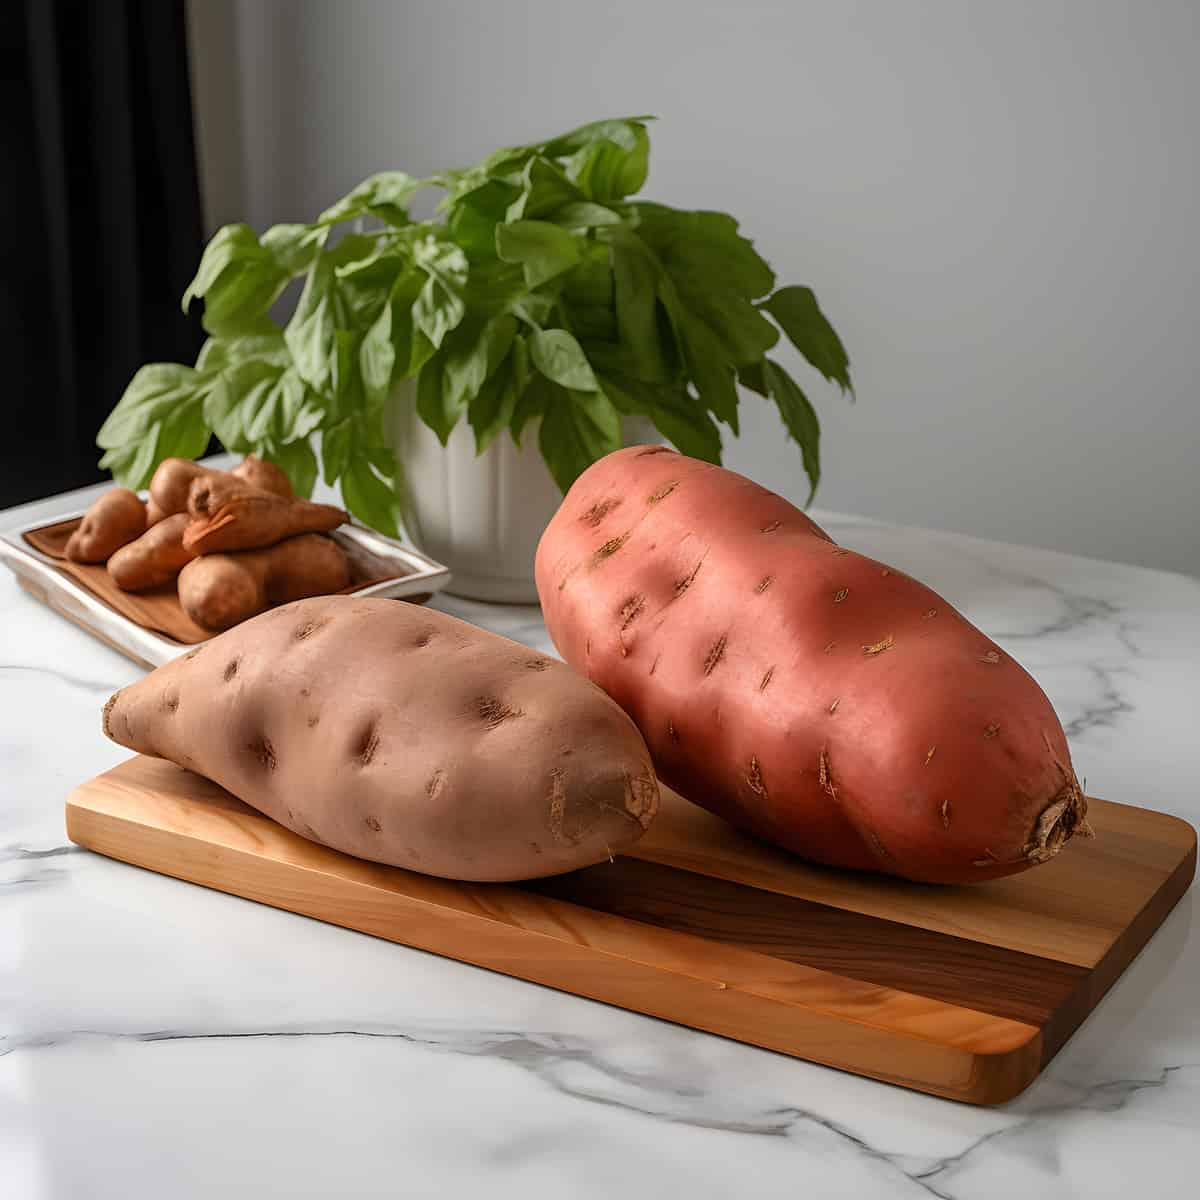 Georgia Red Or T Sweet Potatoes on a kitchen counter